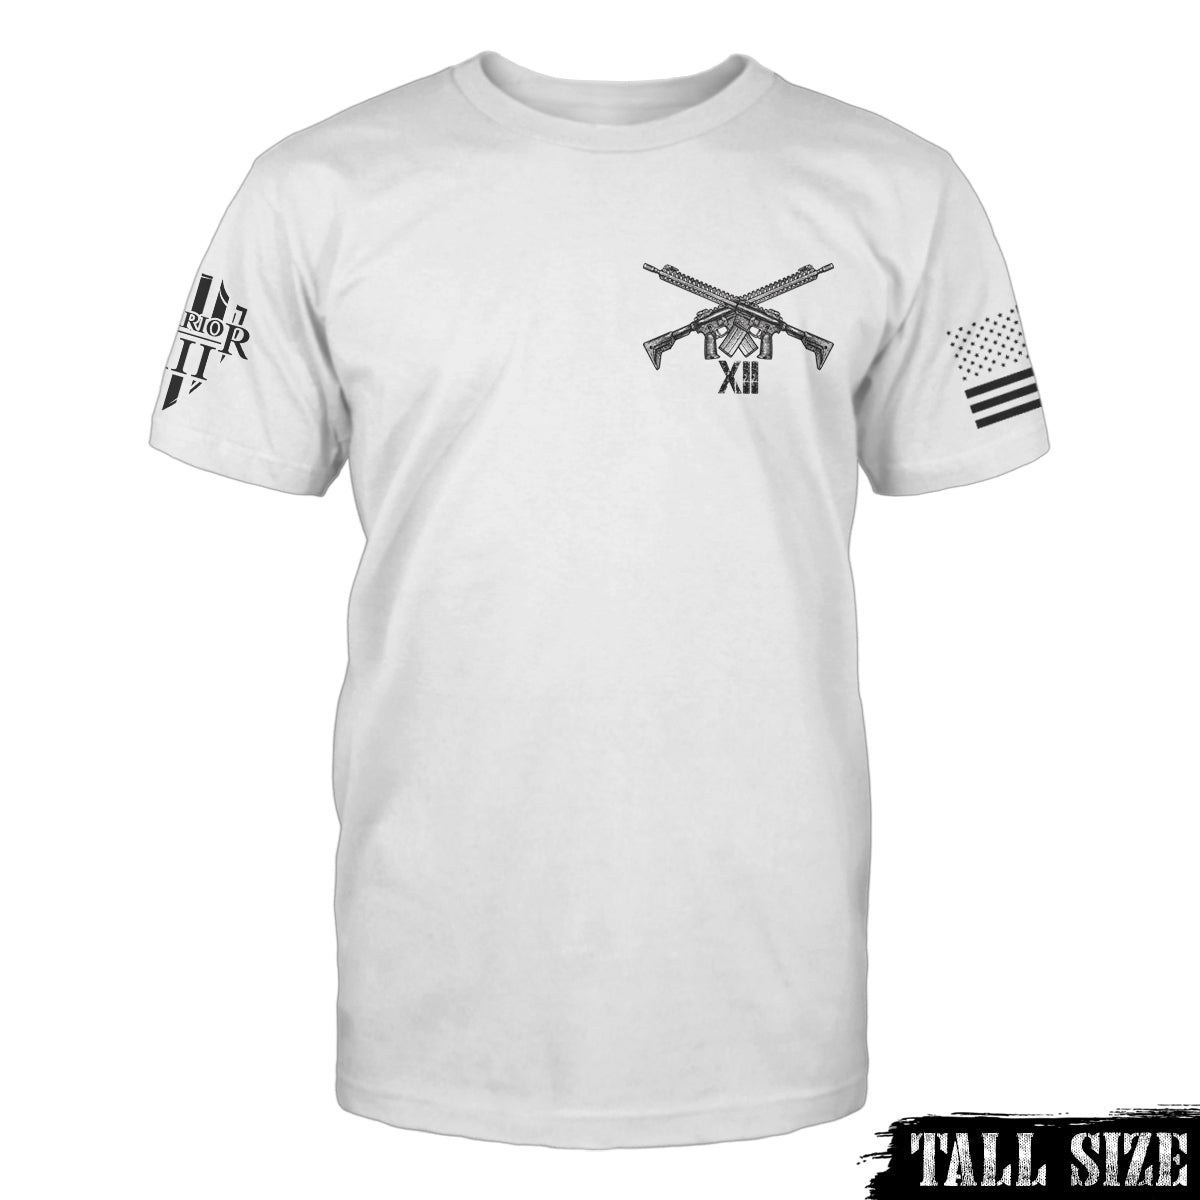 A white tall sized t-shirt with two guns crossed over printed on the front of the shirt.